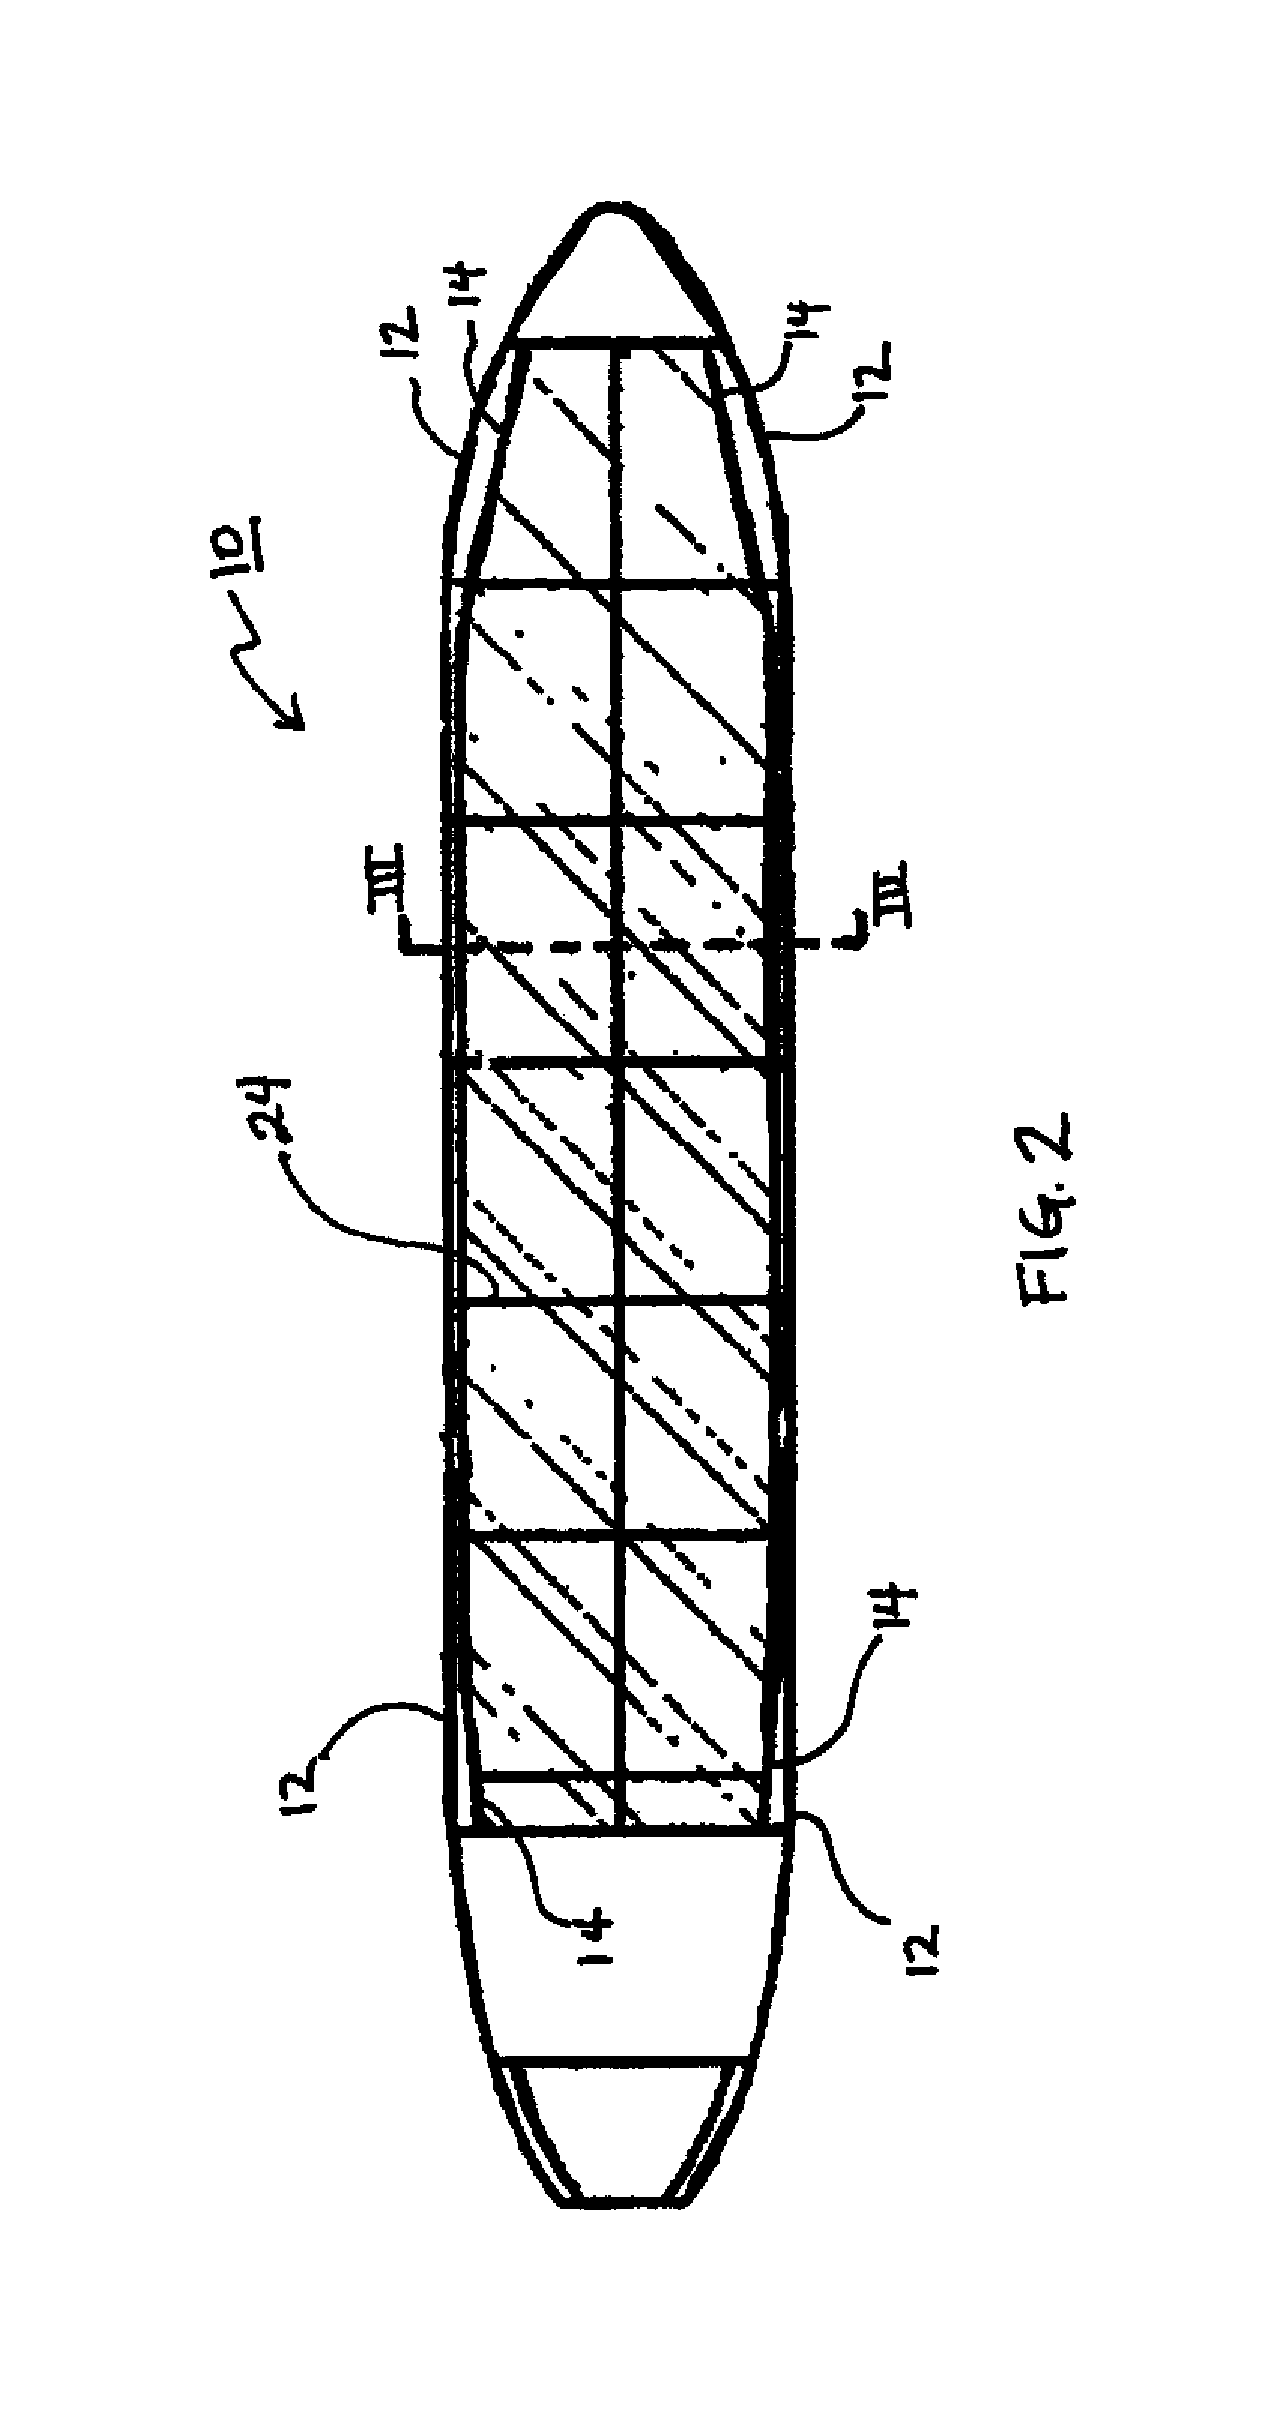 System and method for remote inspection of liquid filled structures